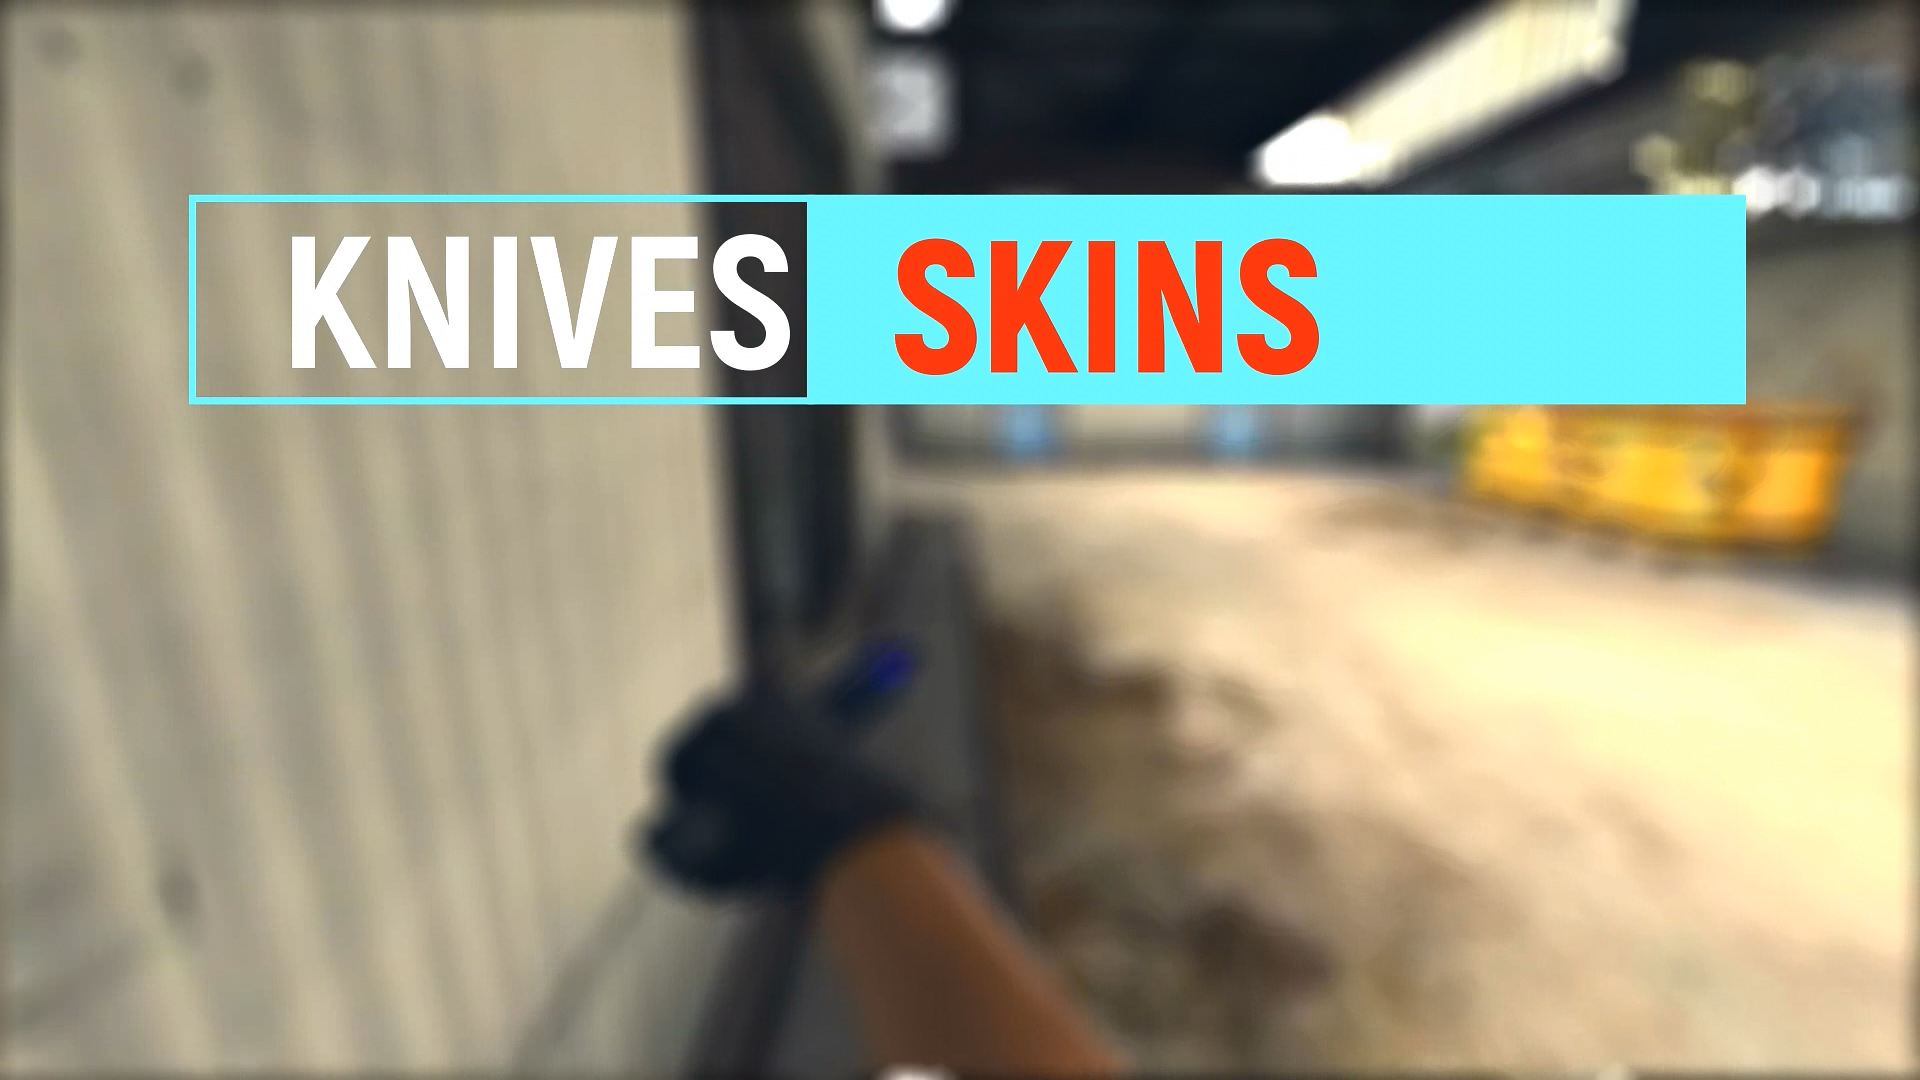 m4a4 | Knives skins